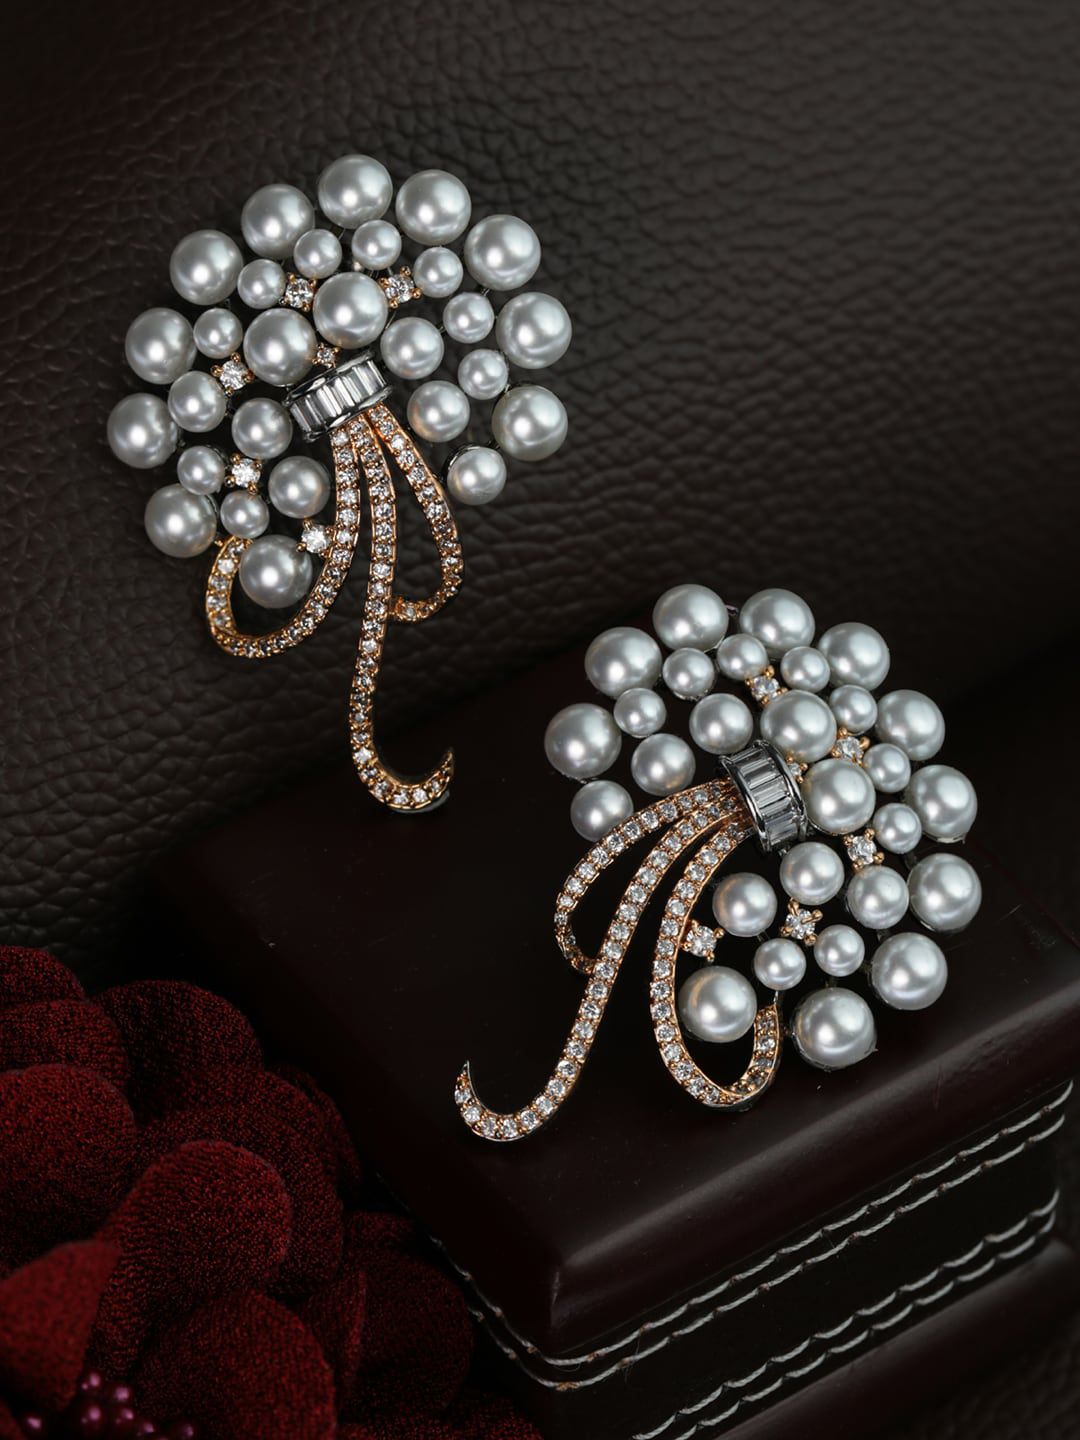 Priyaasi Silver-Toned Contemporary Studs Earrings Price in India